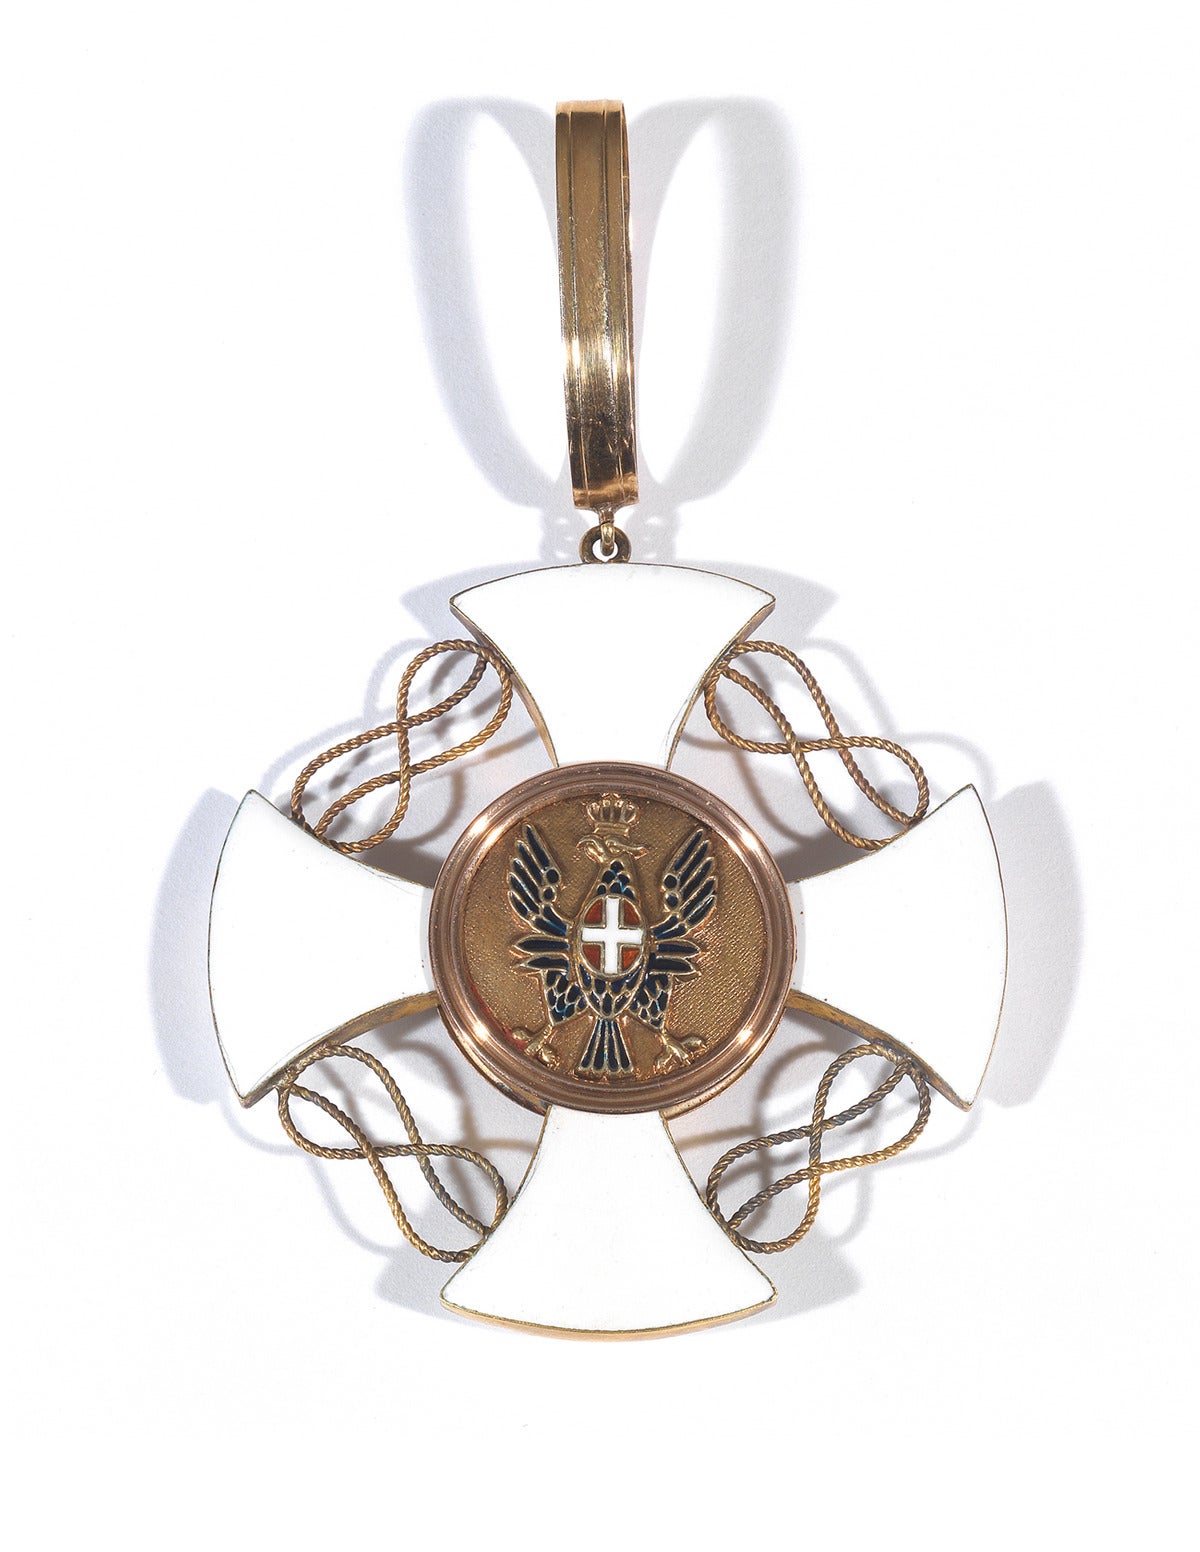 The cross with curved edges, enamelled in white, with the so-called Savoy knots between the arms of the cross. The front central disc featured the Iron Crown of Lombardy on a blue enamel background. The back central disc with a black-enameled eagle